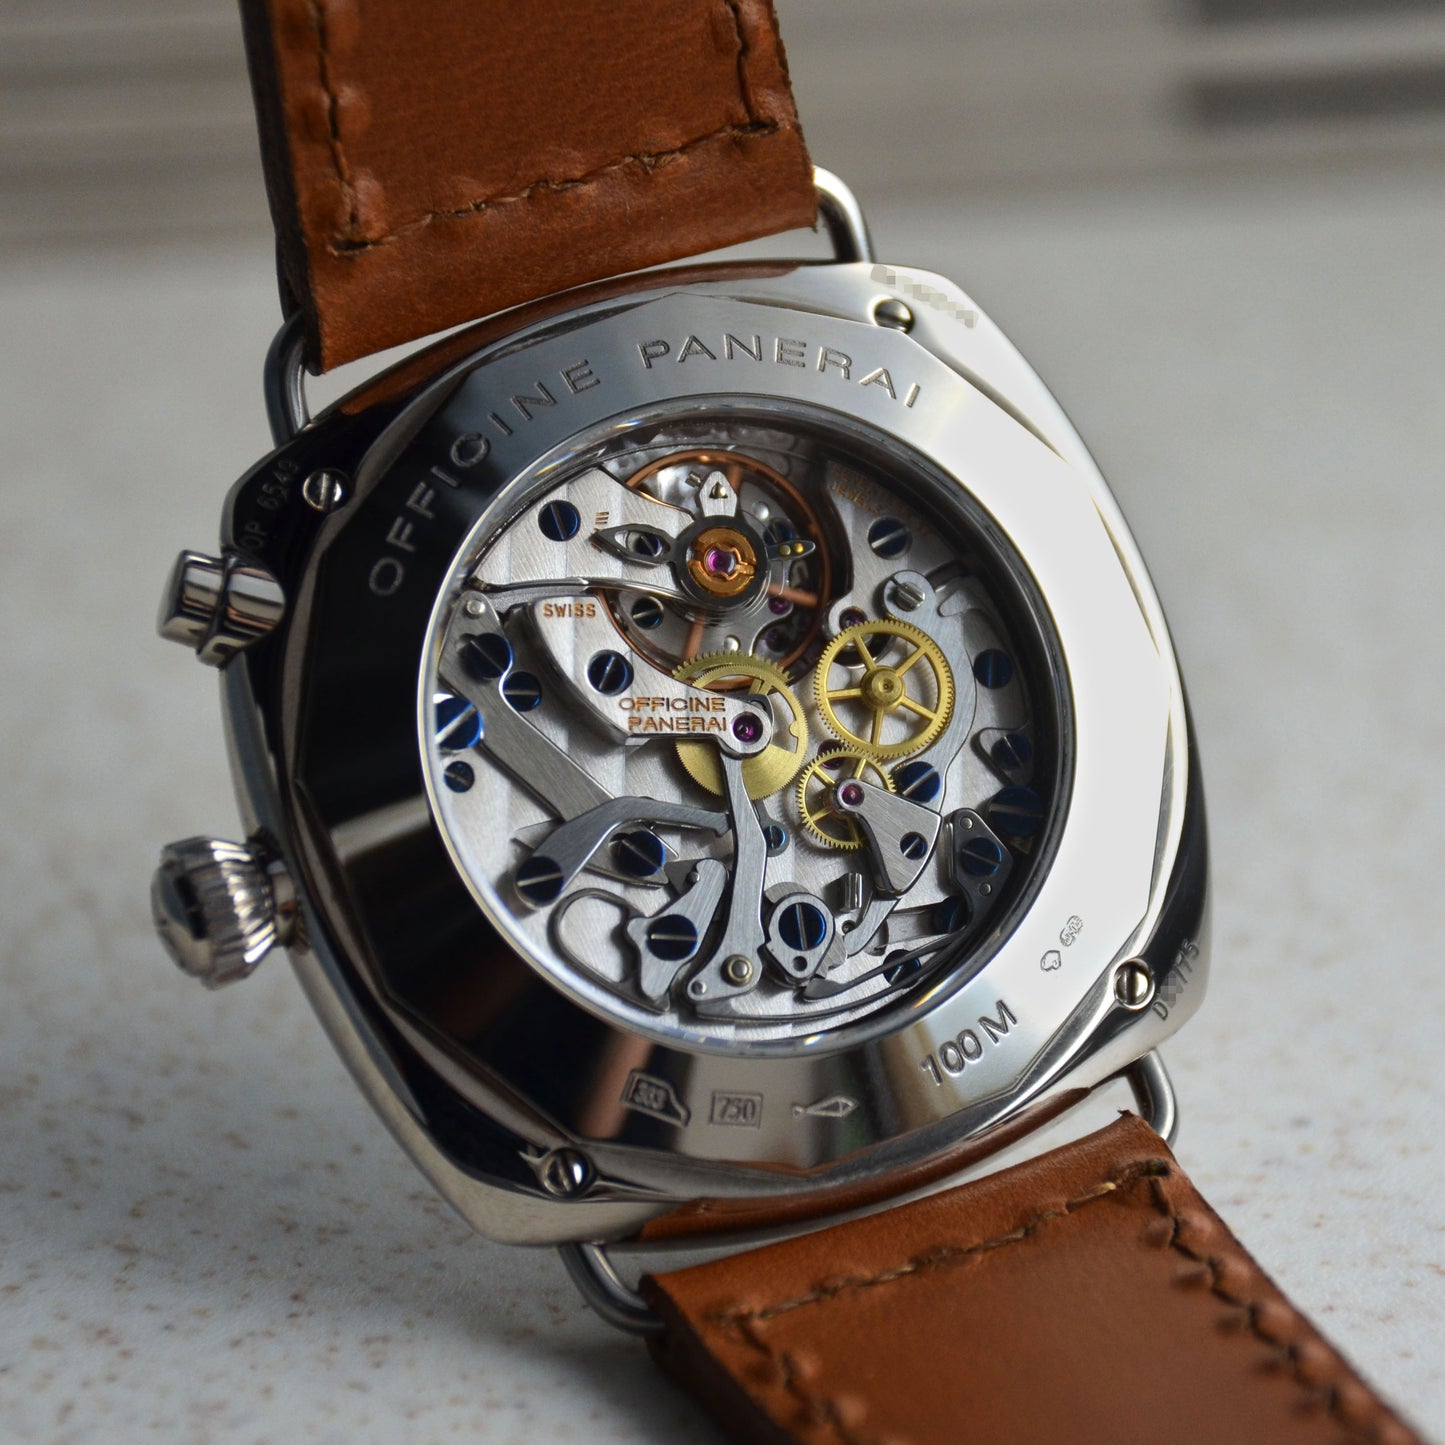 Panerai Radiomir Seconds Counter, Special Edition, White Gold